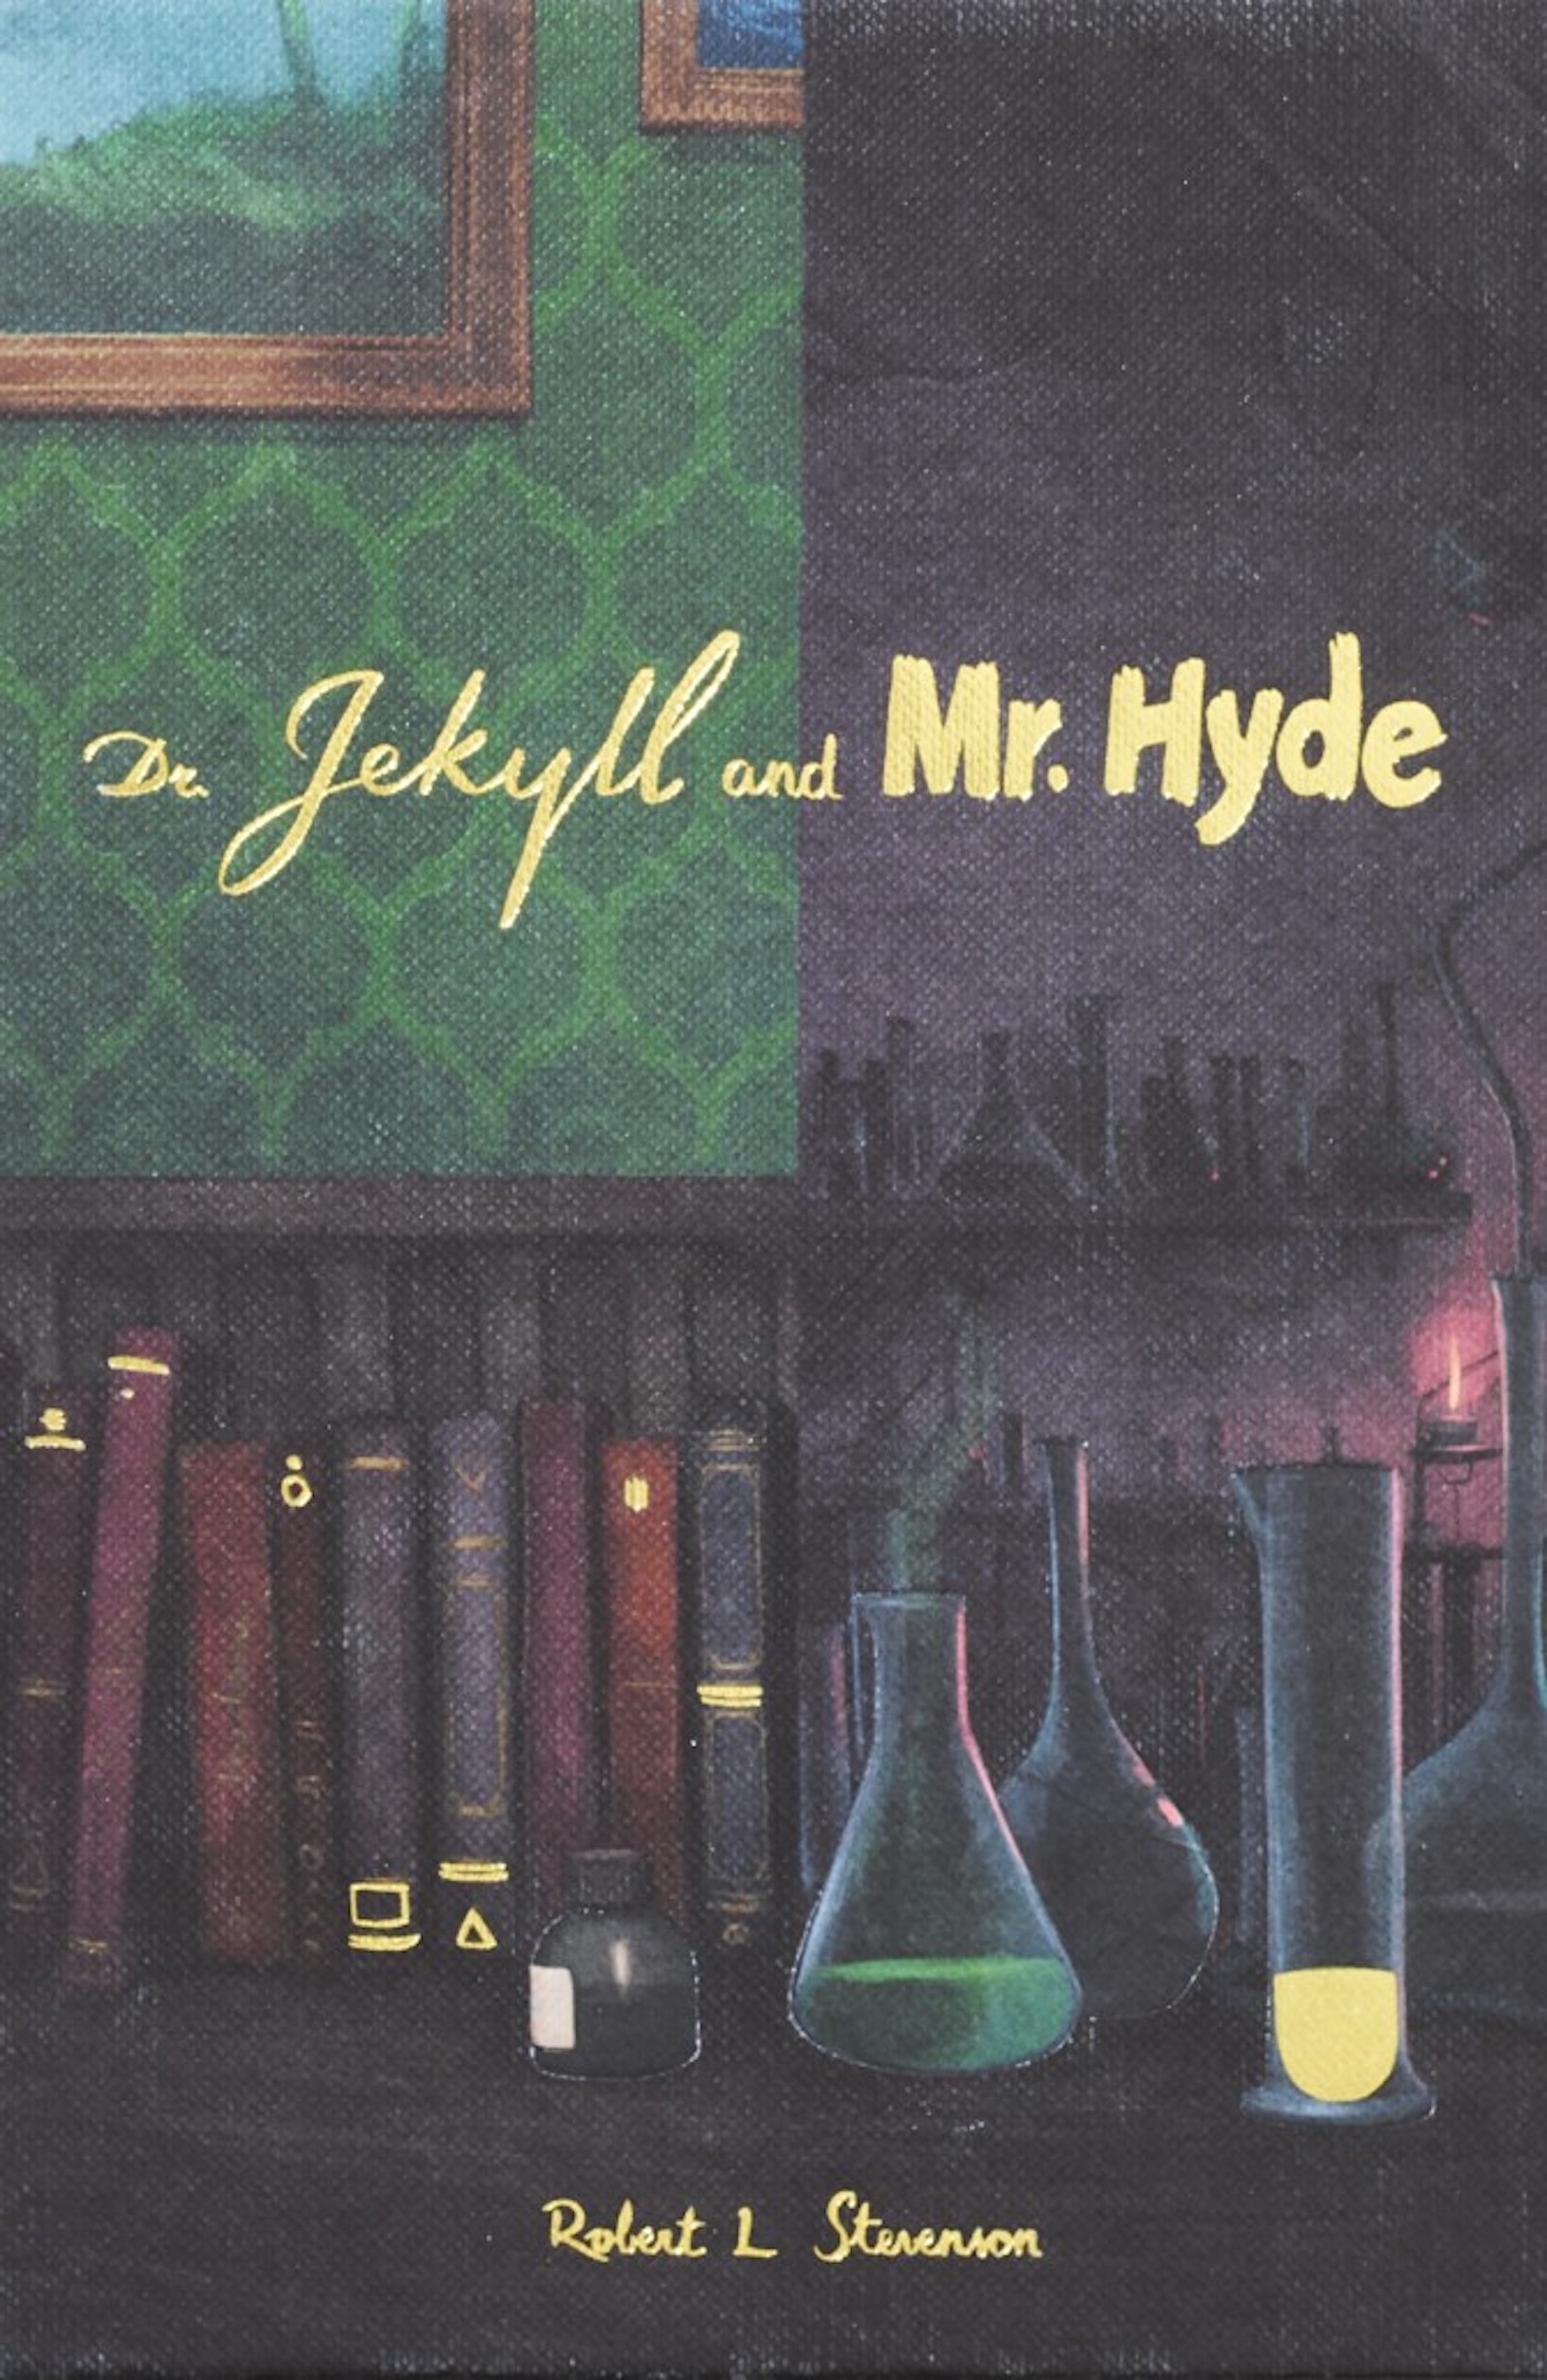 Dr Jekyll and Mr Hyde - Collectors Edition